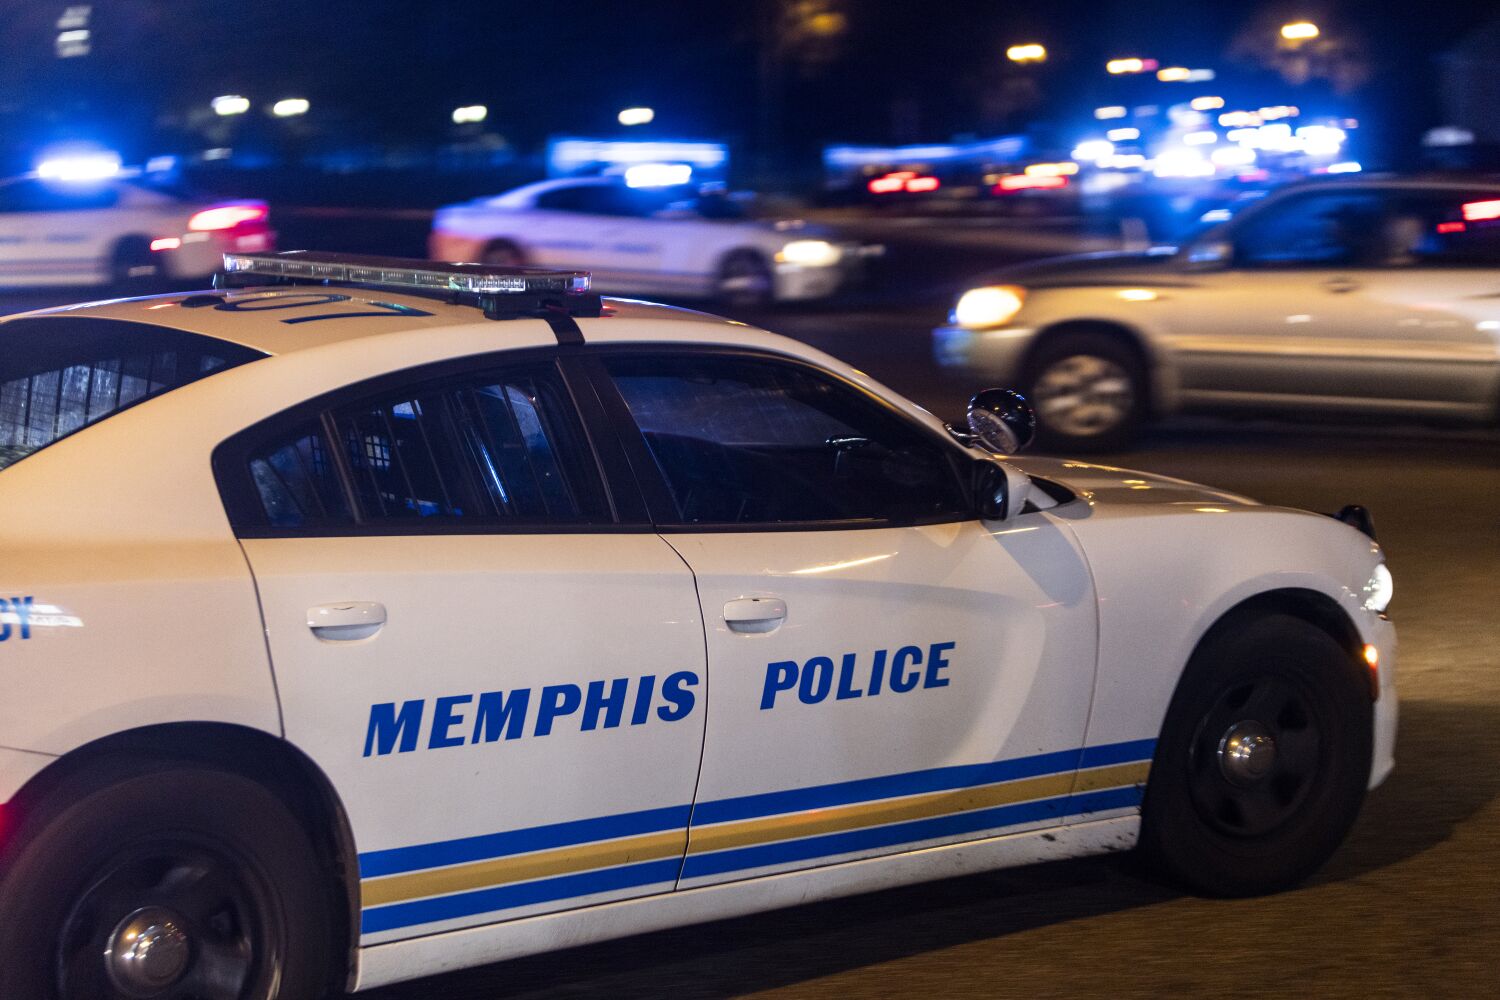 After Tyre Nichols' beating death, Memphis police 'SCORPION' unit under fire